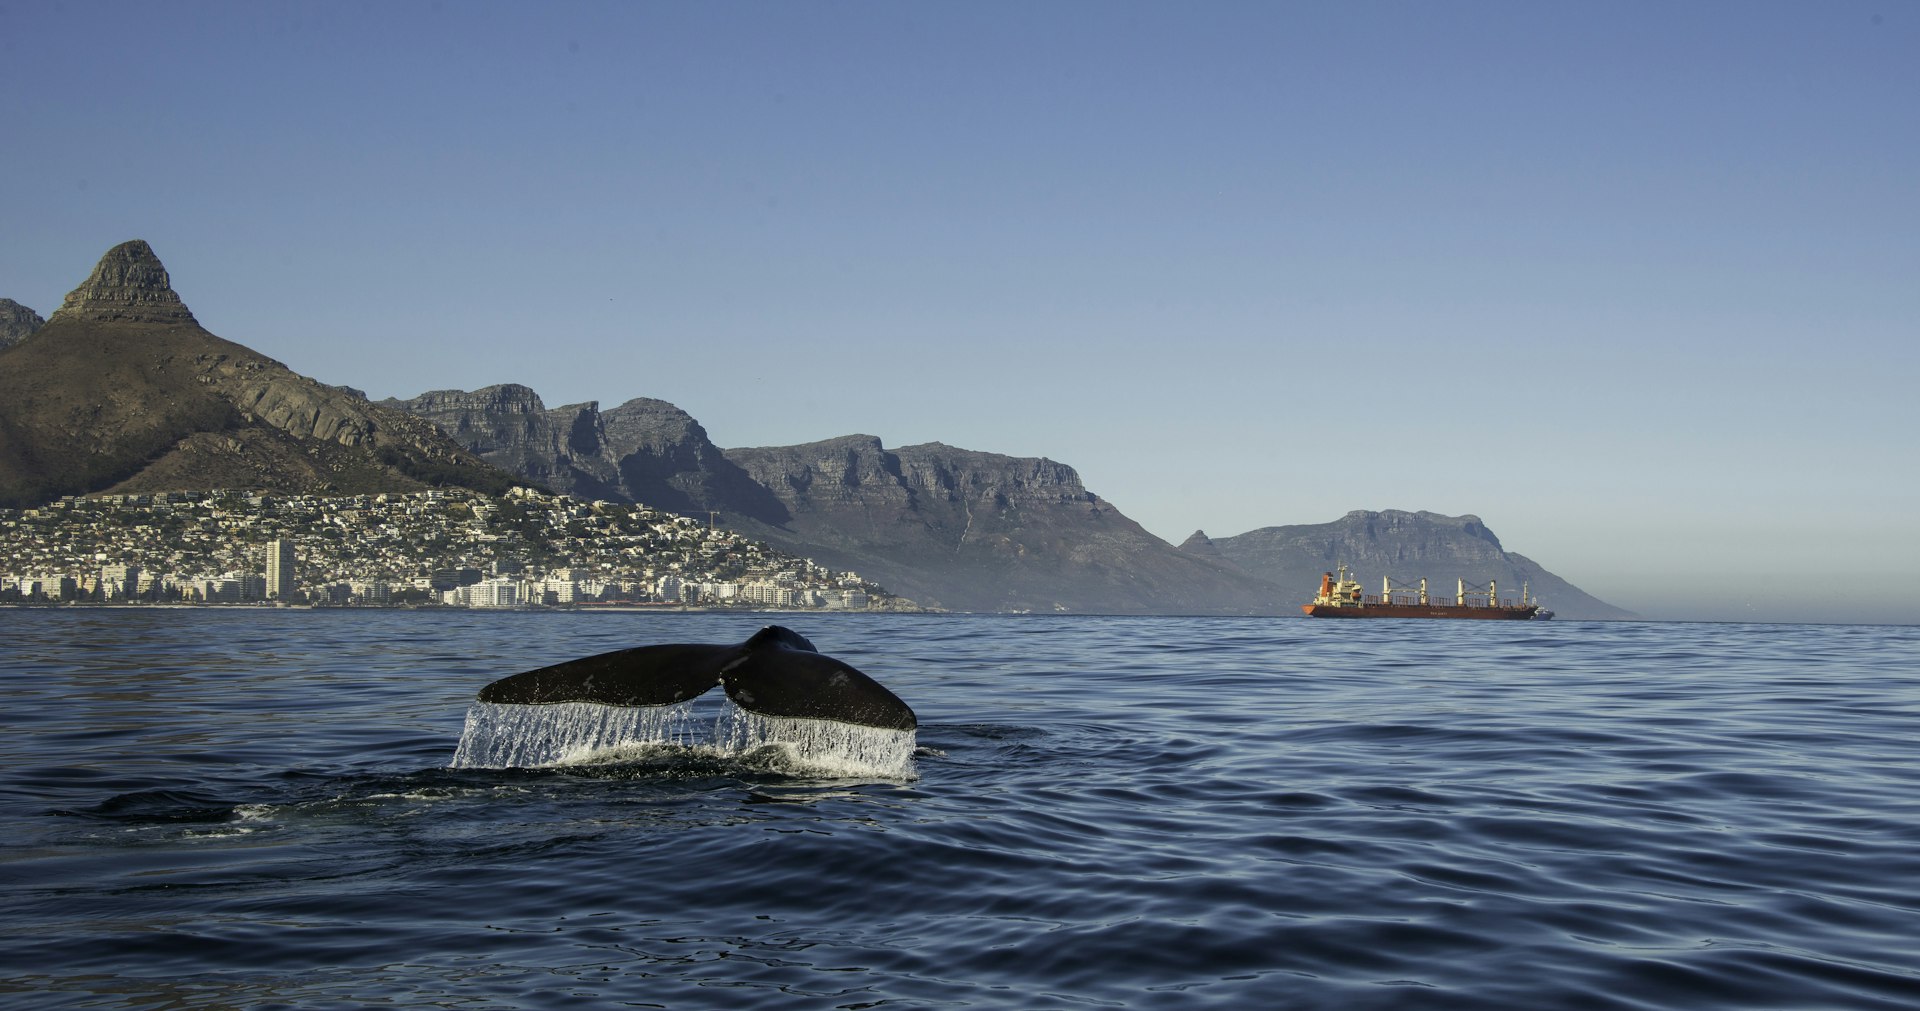 A whale's tail breaches the water near the distinctive mountainous skyline of Cape Town